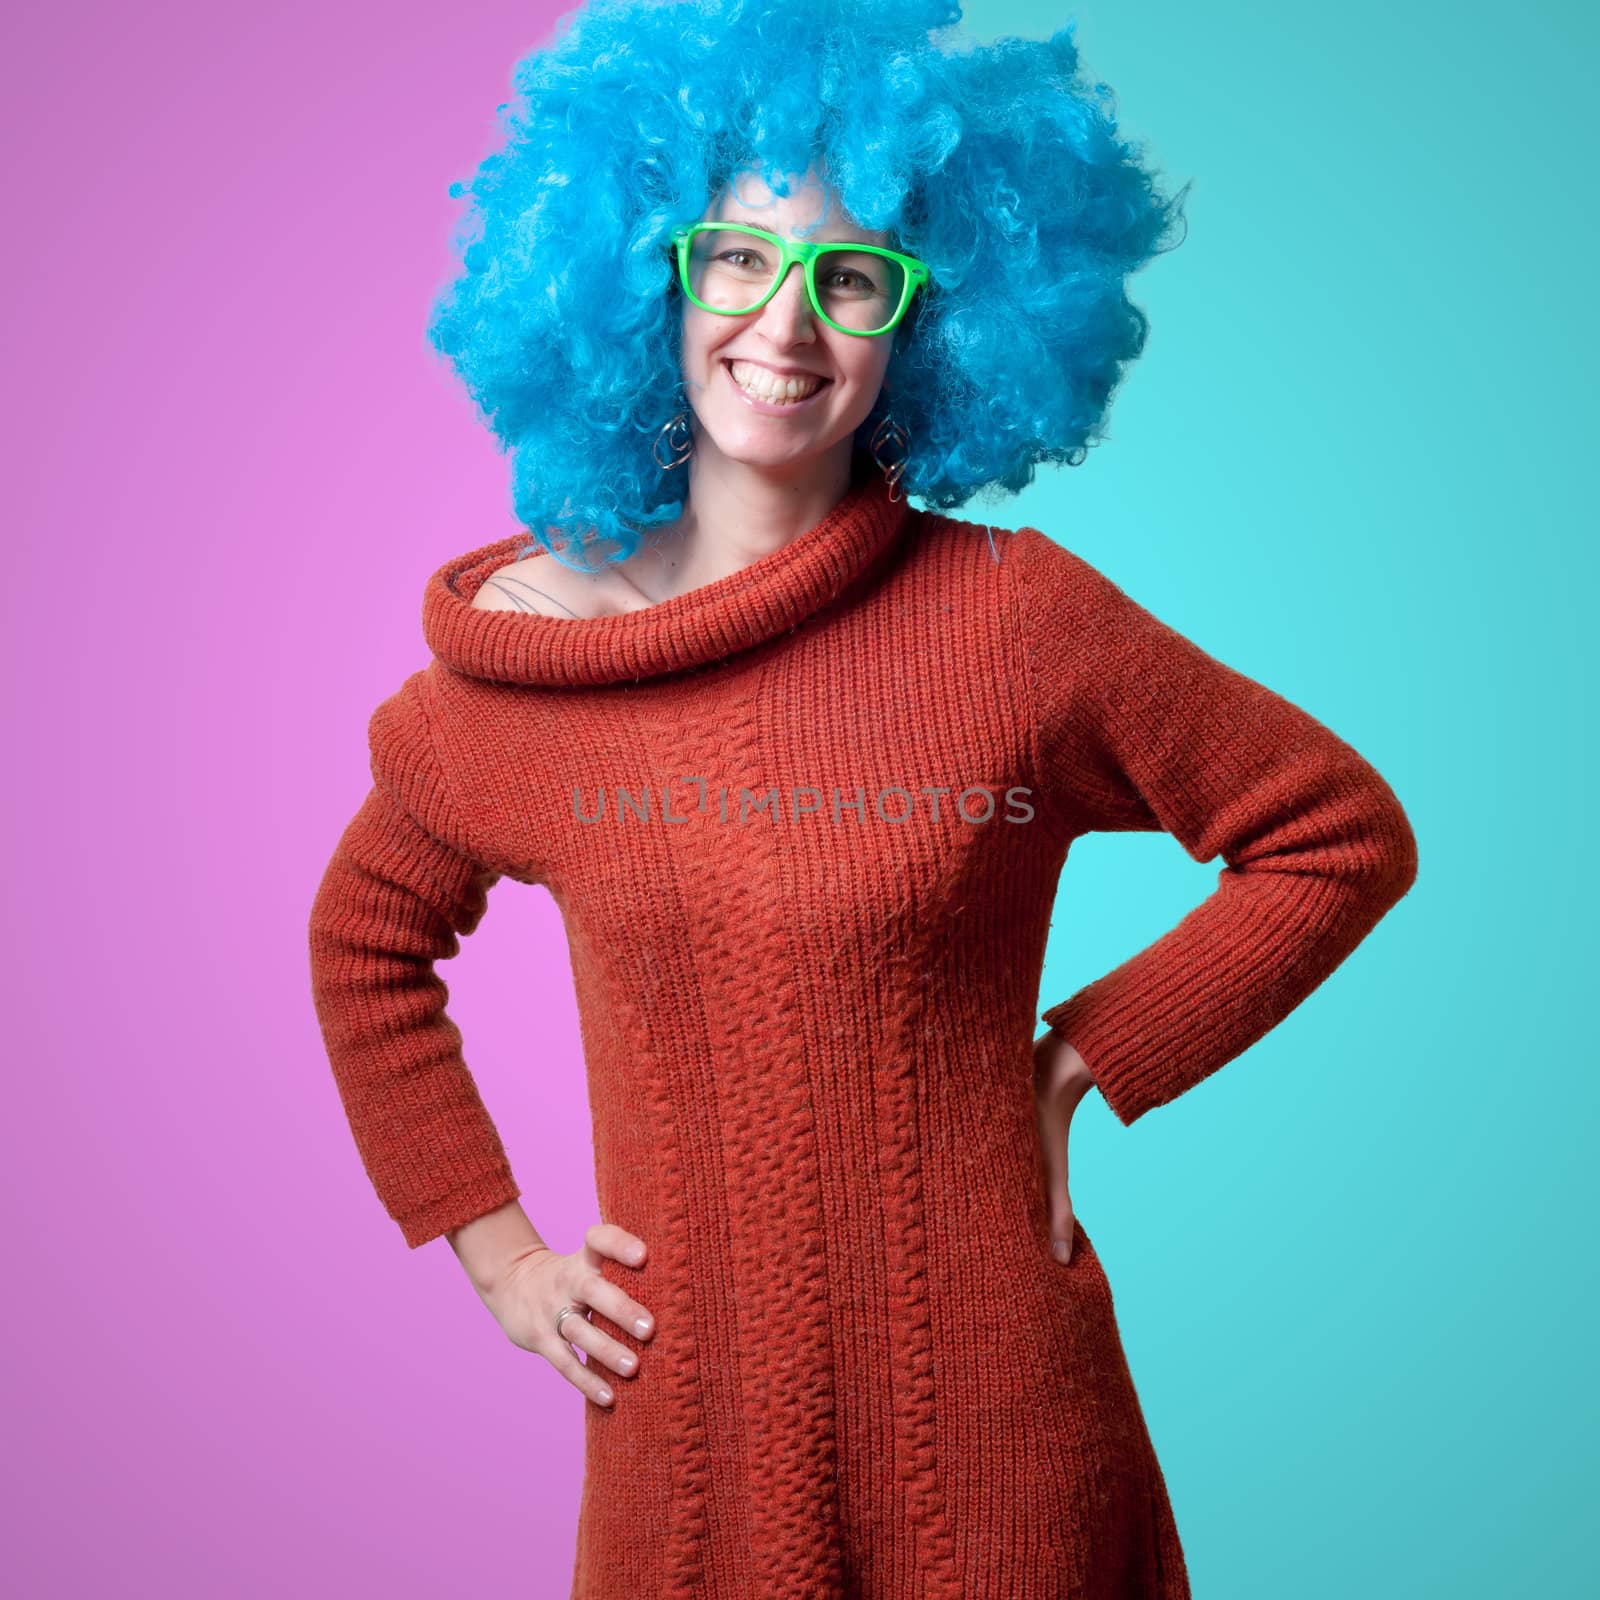 beautiful girl with curly blue wig and turtleneck on white background